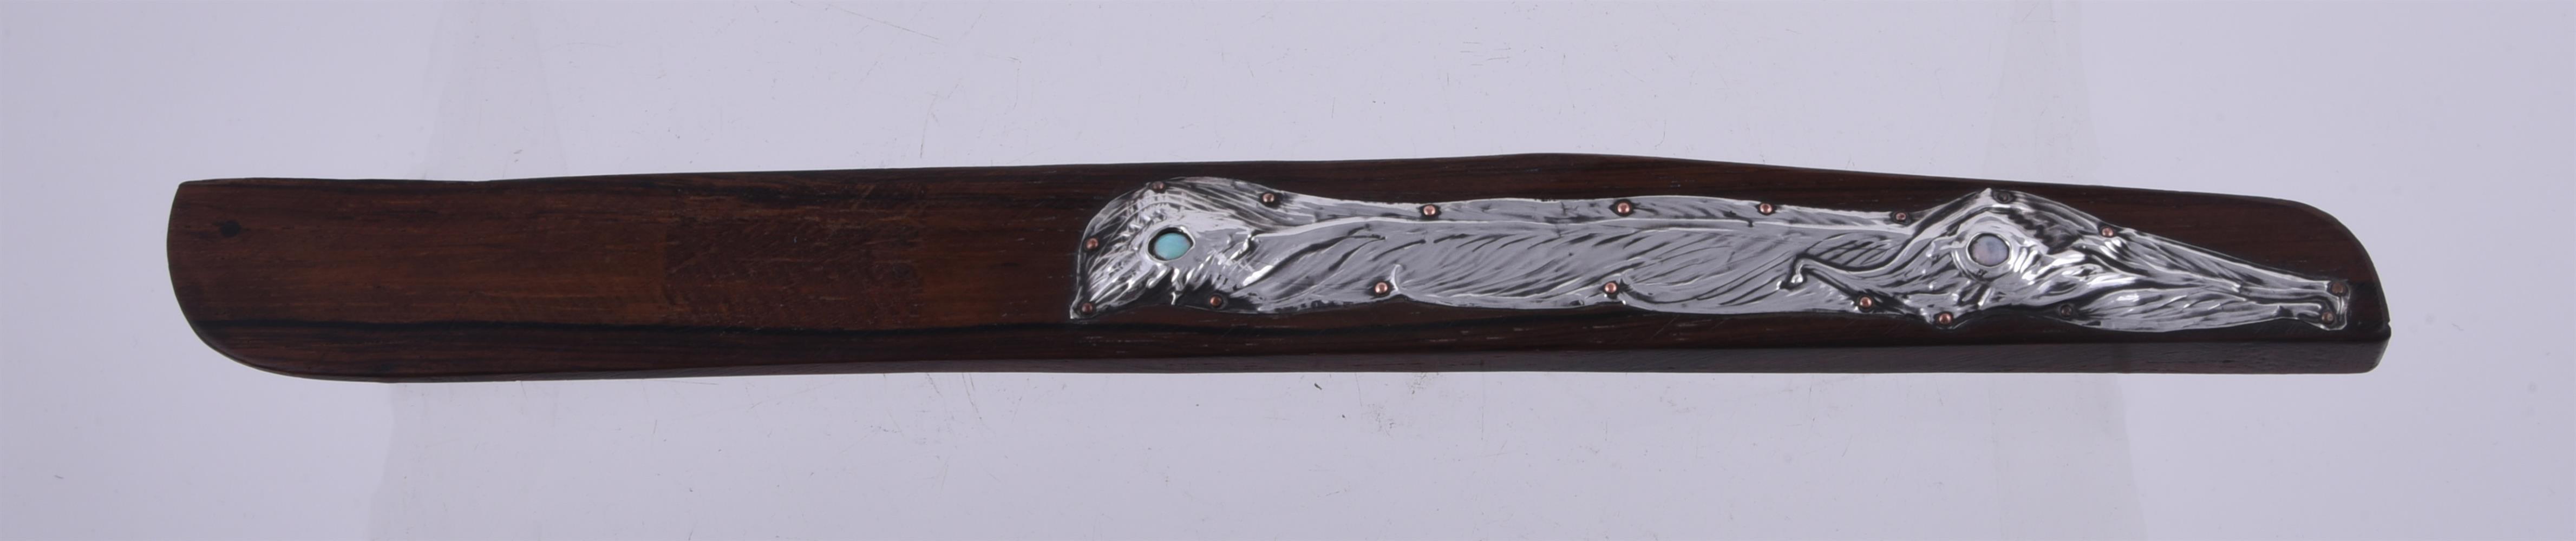 Y AN ARTS AND CRAFTS SILVER MOUNTED ROSEWOOD PAGE TURNER - Image 2 of 2